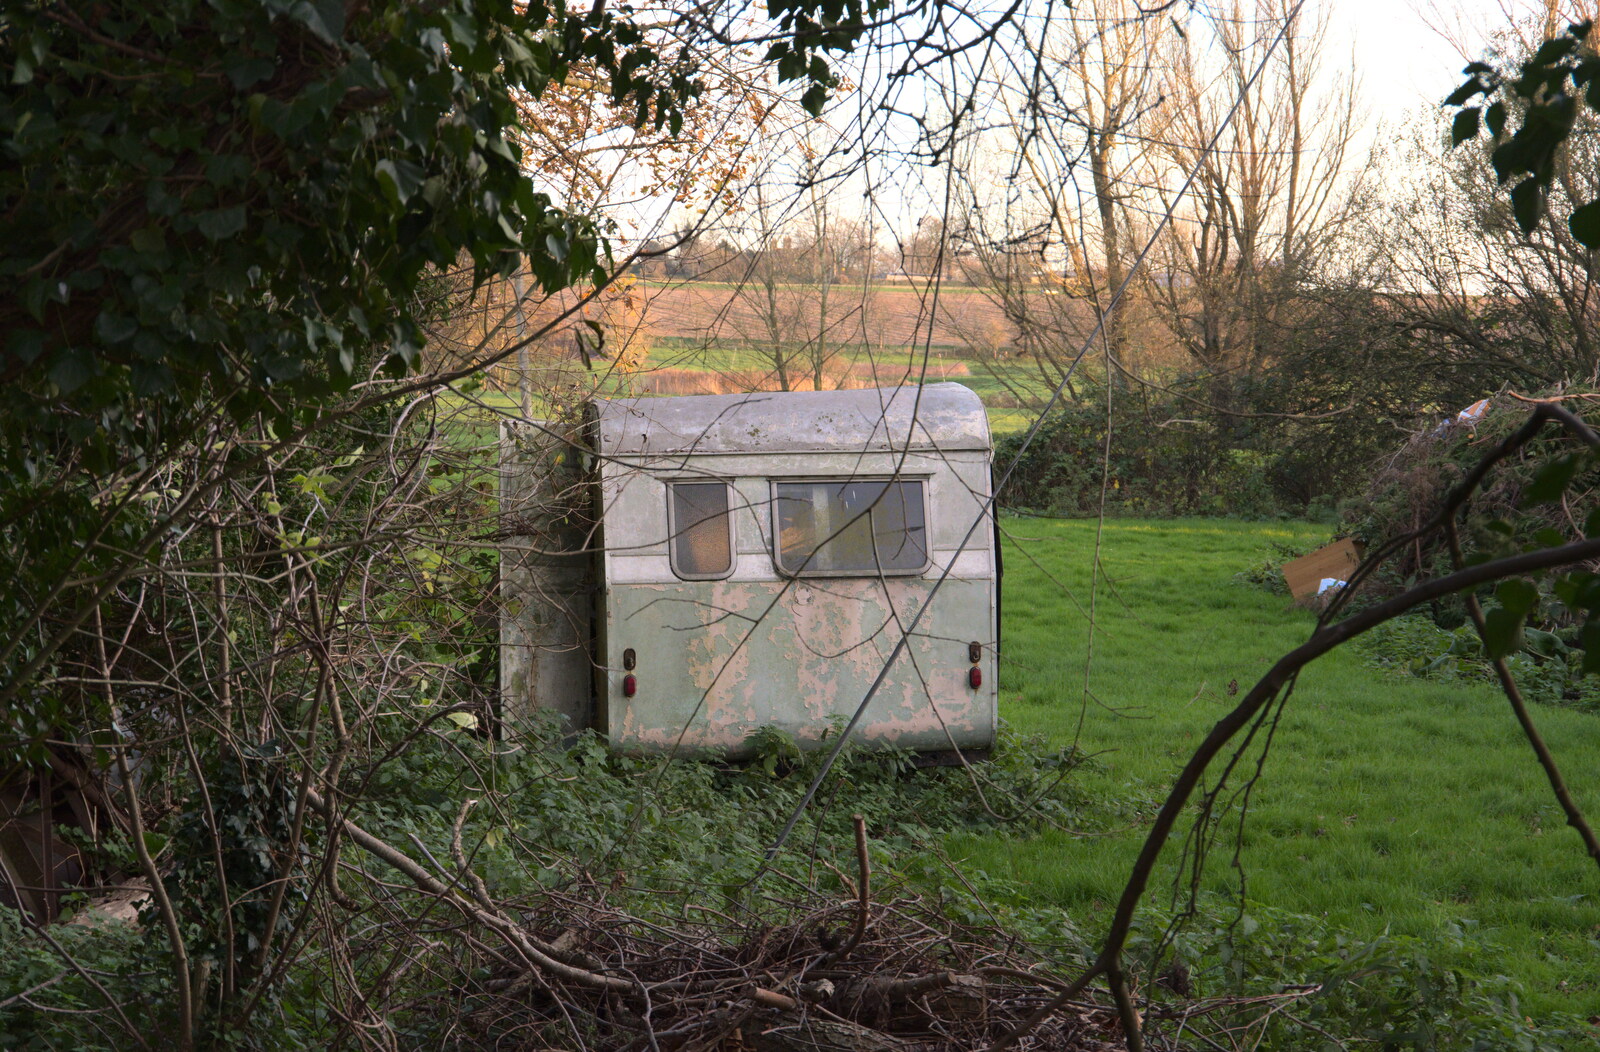 A derelict caravan in a field from The Dereliction of Eye, Suffolk - 22nd November 2020